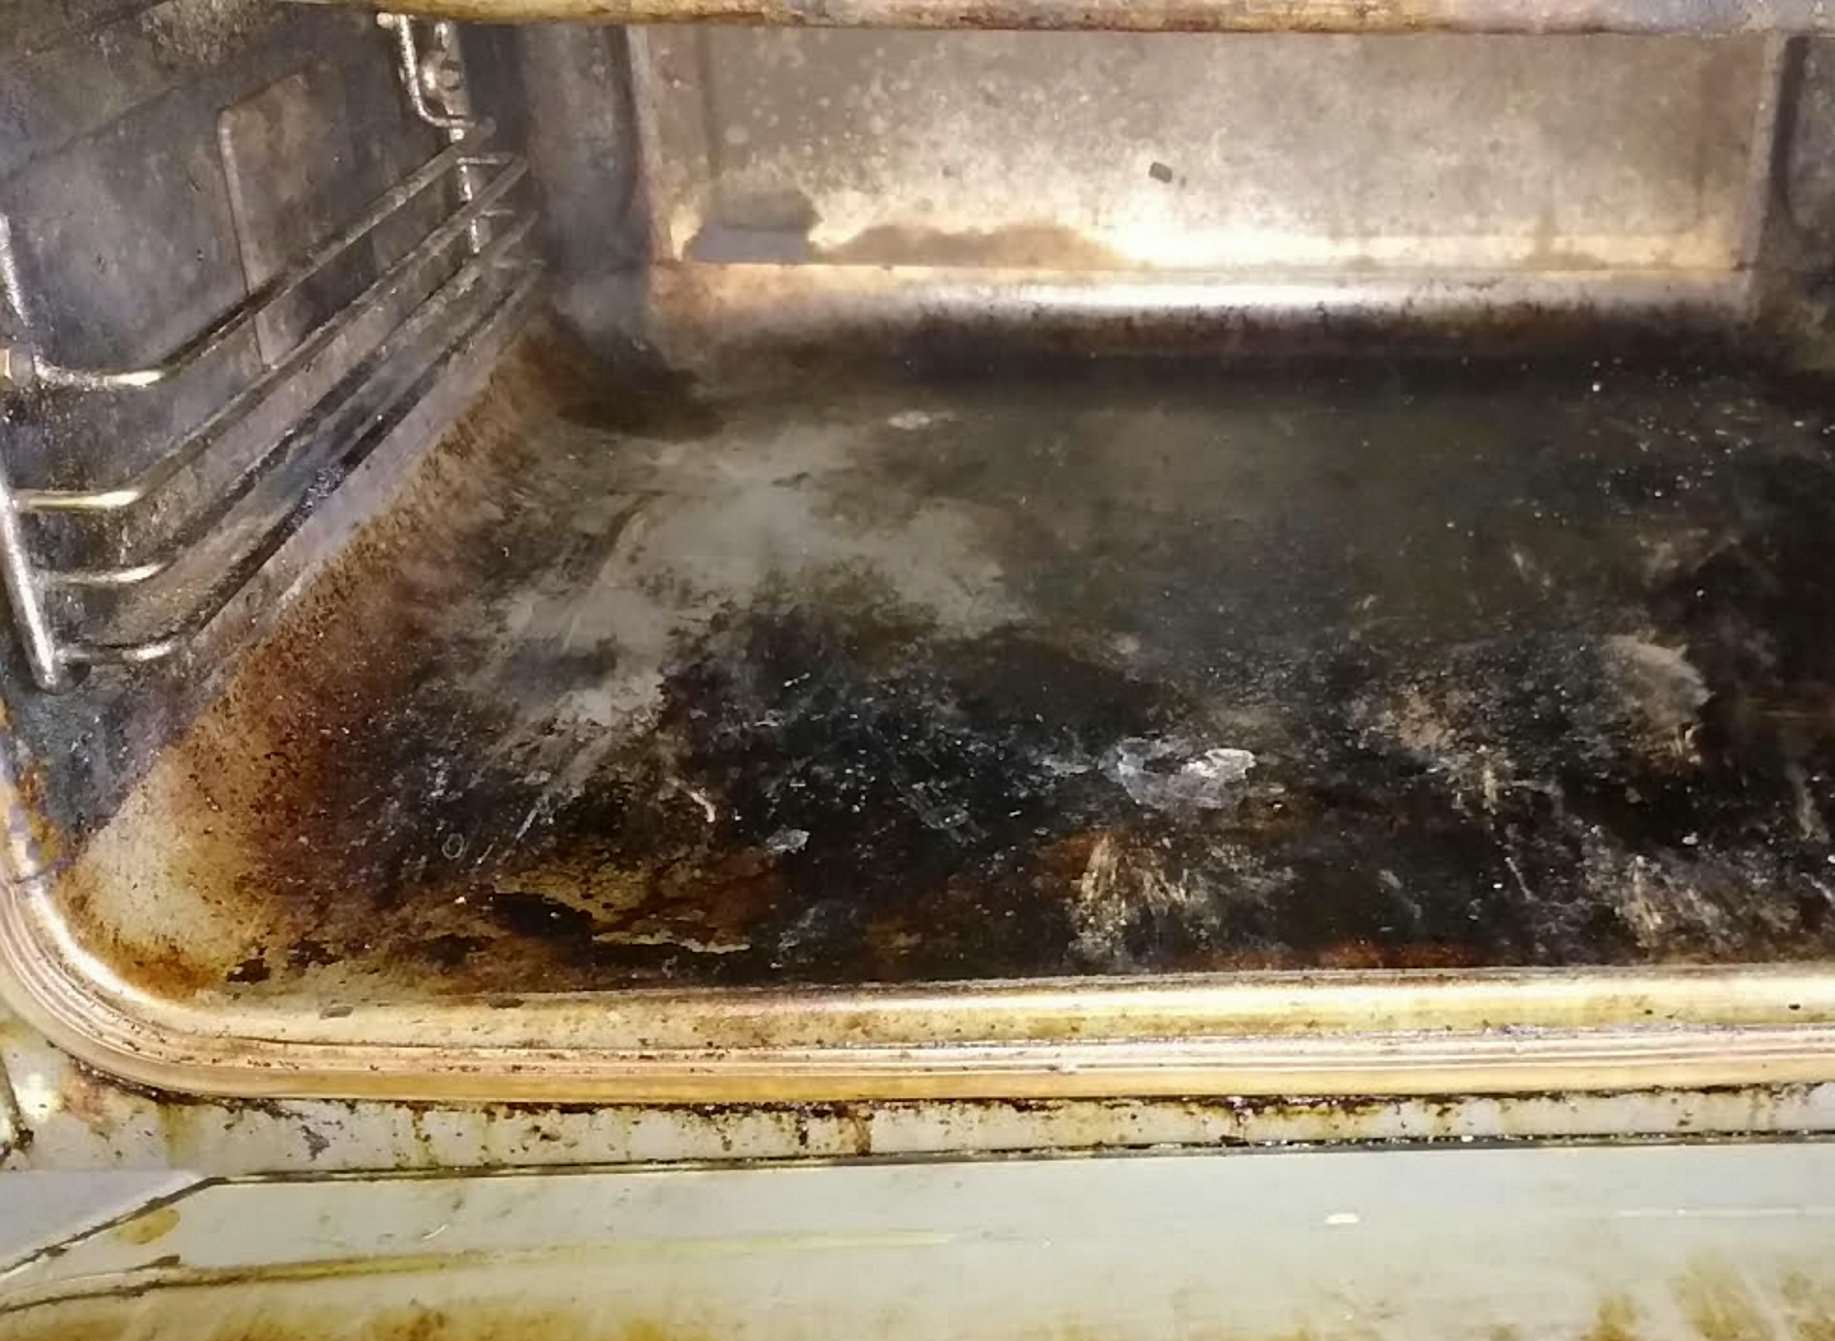 The oven is black with grime. Picture: SWNS